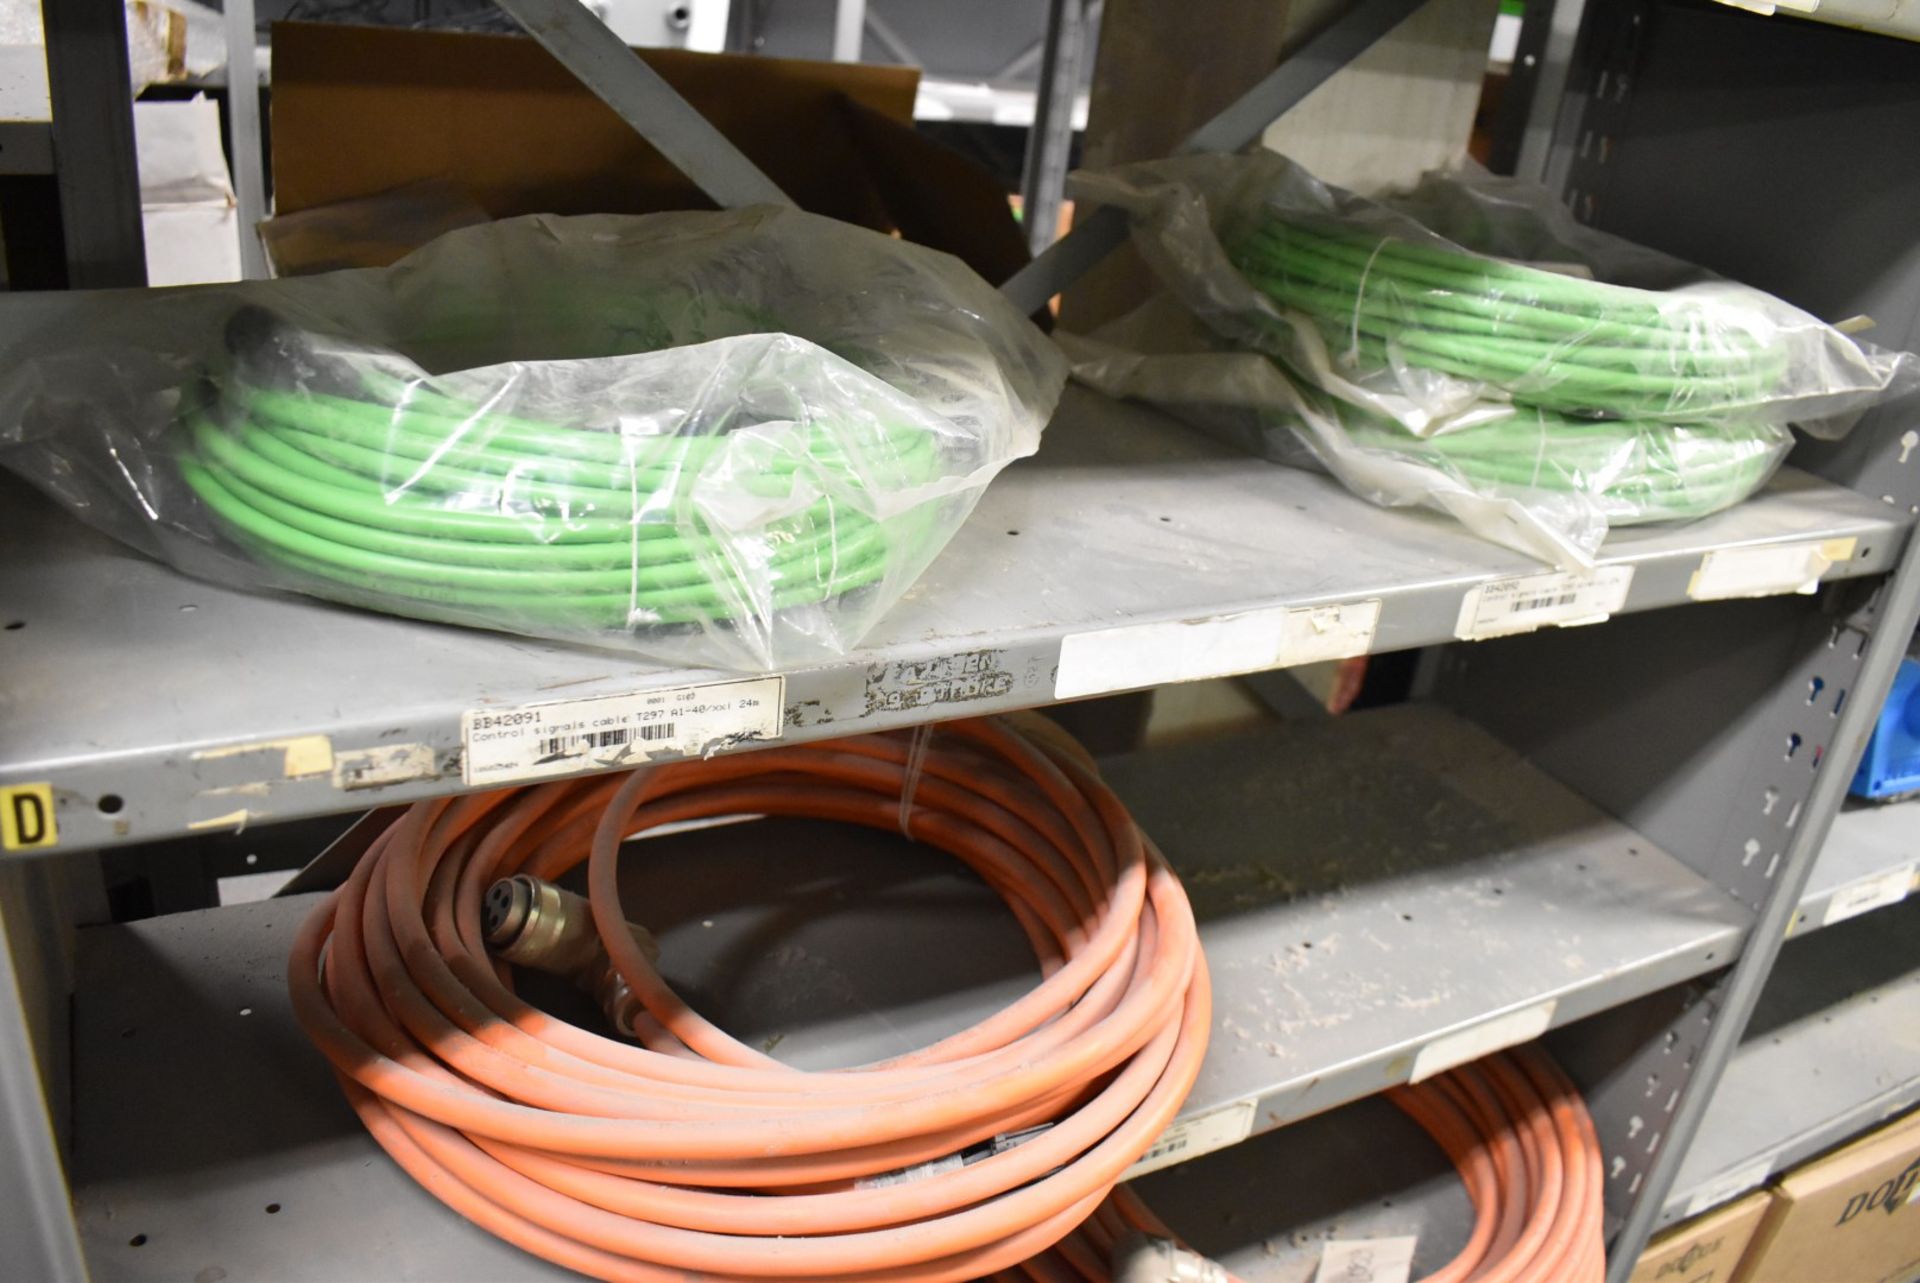 LOT/ CONTENTS OF SHELF - AUTOMATION CABLES, ROSEMOUNT 2" MAGNETIC FLOW METER, SPARE PARTS [RIGGING - Image 4 of 5